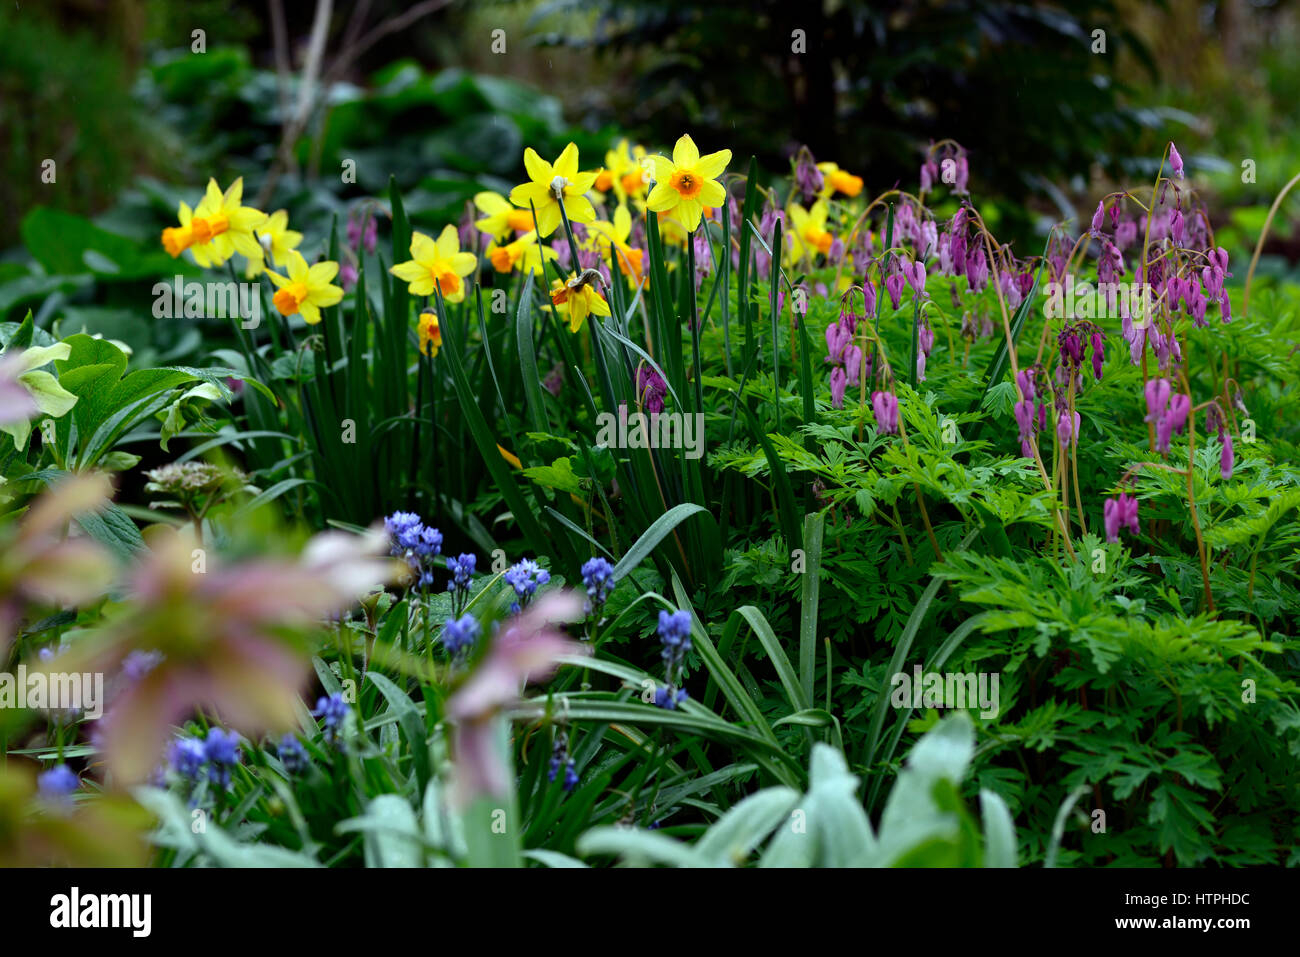 narcissus, daffodil, dicentra eximia, pink, flowers, bleeding hearts, ground cover, dense foliage, spring, flowering, perennial, RM Floral Stock Photo